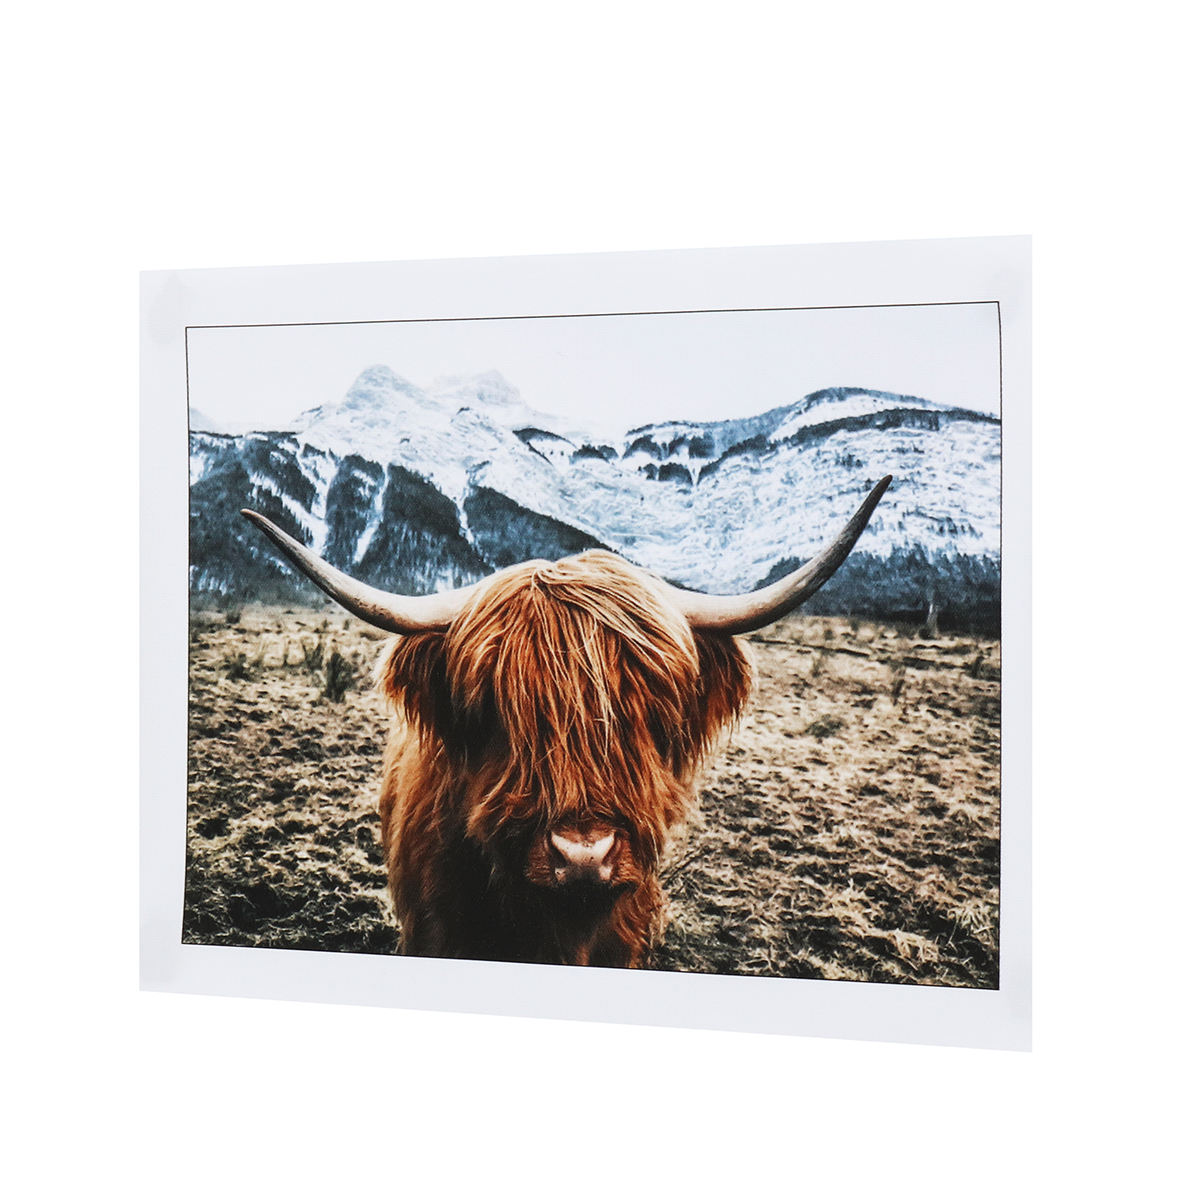 1-Piece-Canvas-Print-Painting-Highland-Cow-Poster-Wall-Decorative-Printing-Art-Pictures-Frameless-Wa-1743443-11